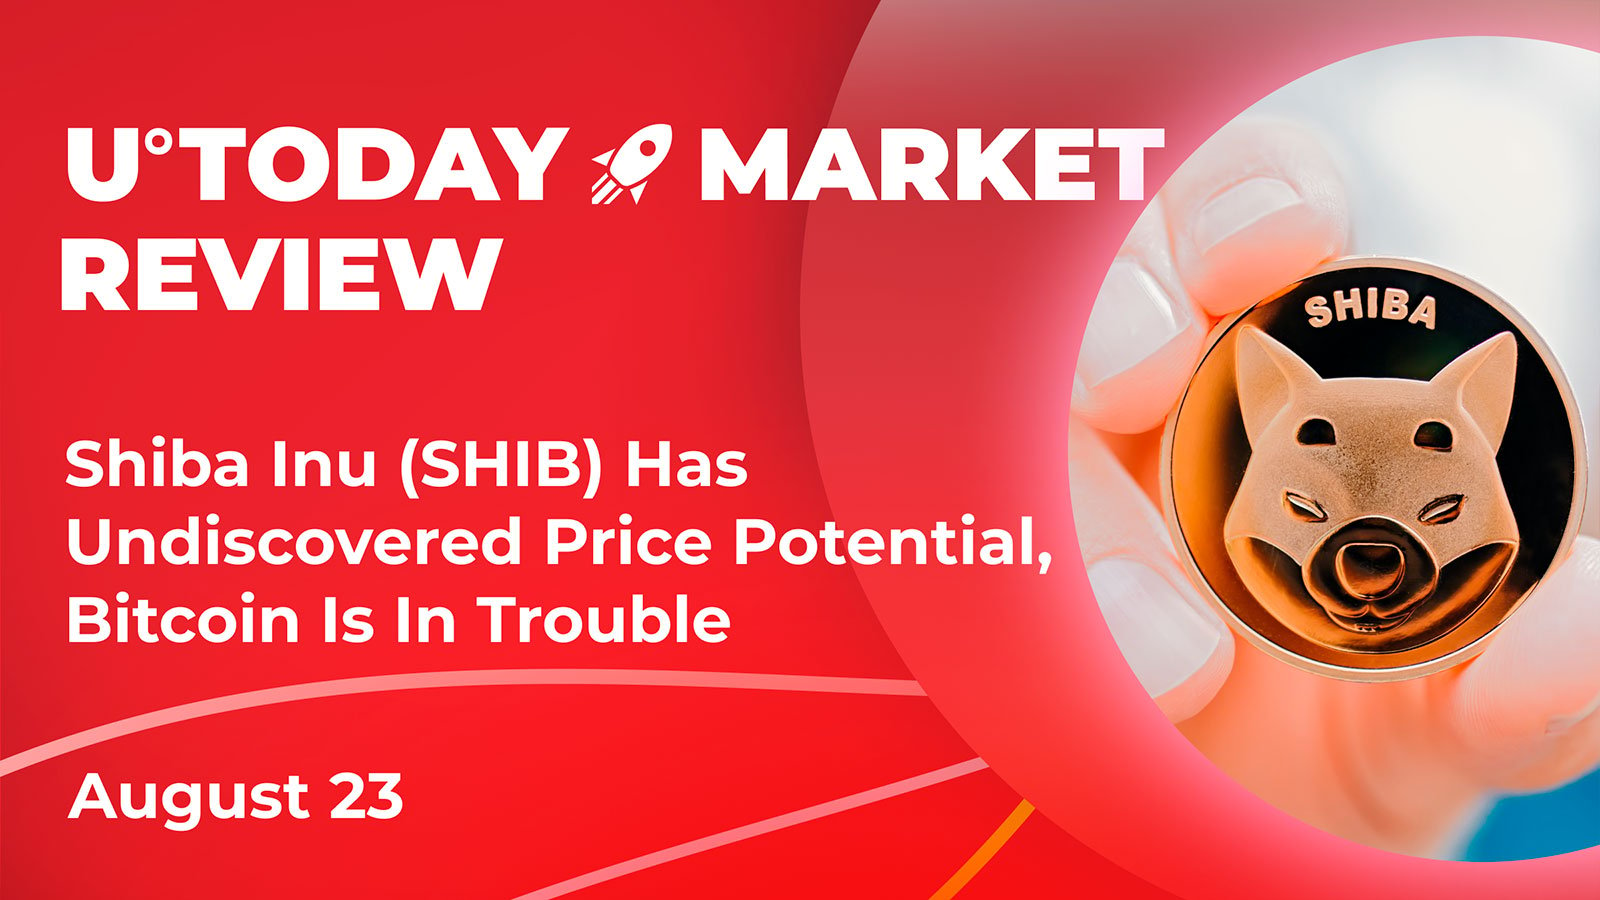 Shiba Inu (SHIB) Has Undiscovered Price Potential: Crypto Market Review, August 23